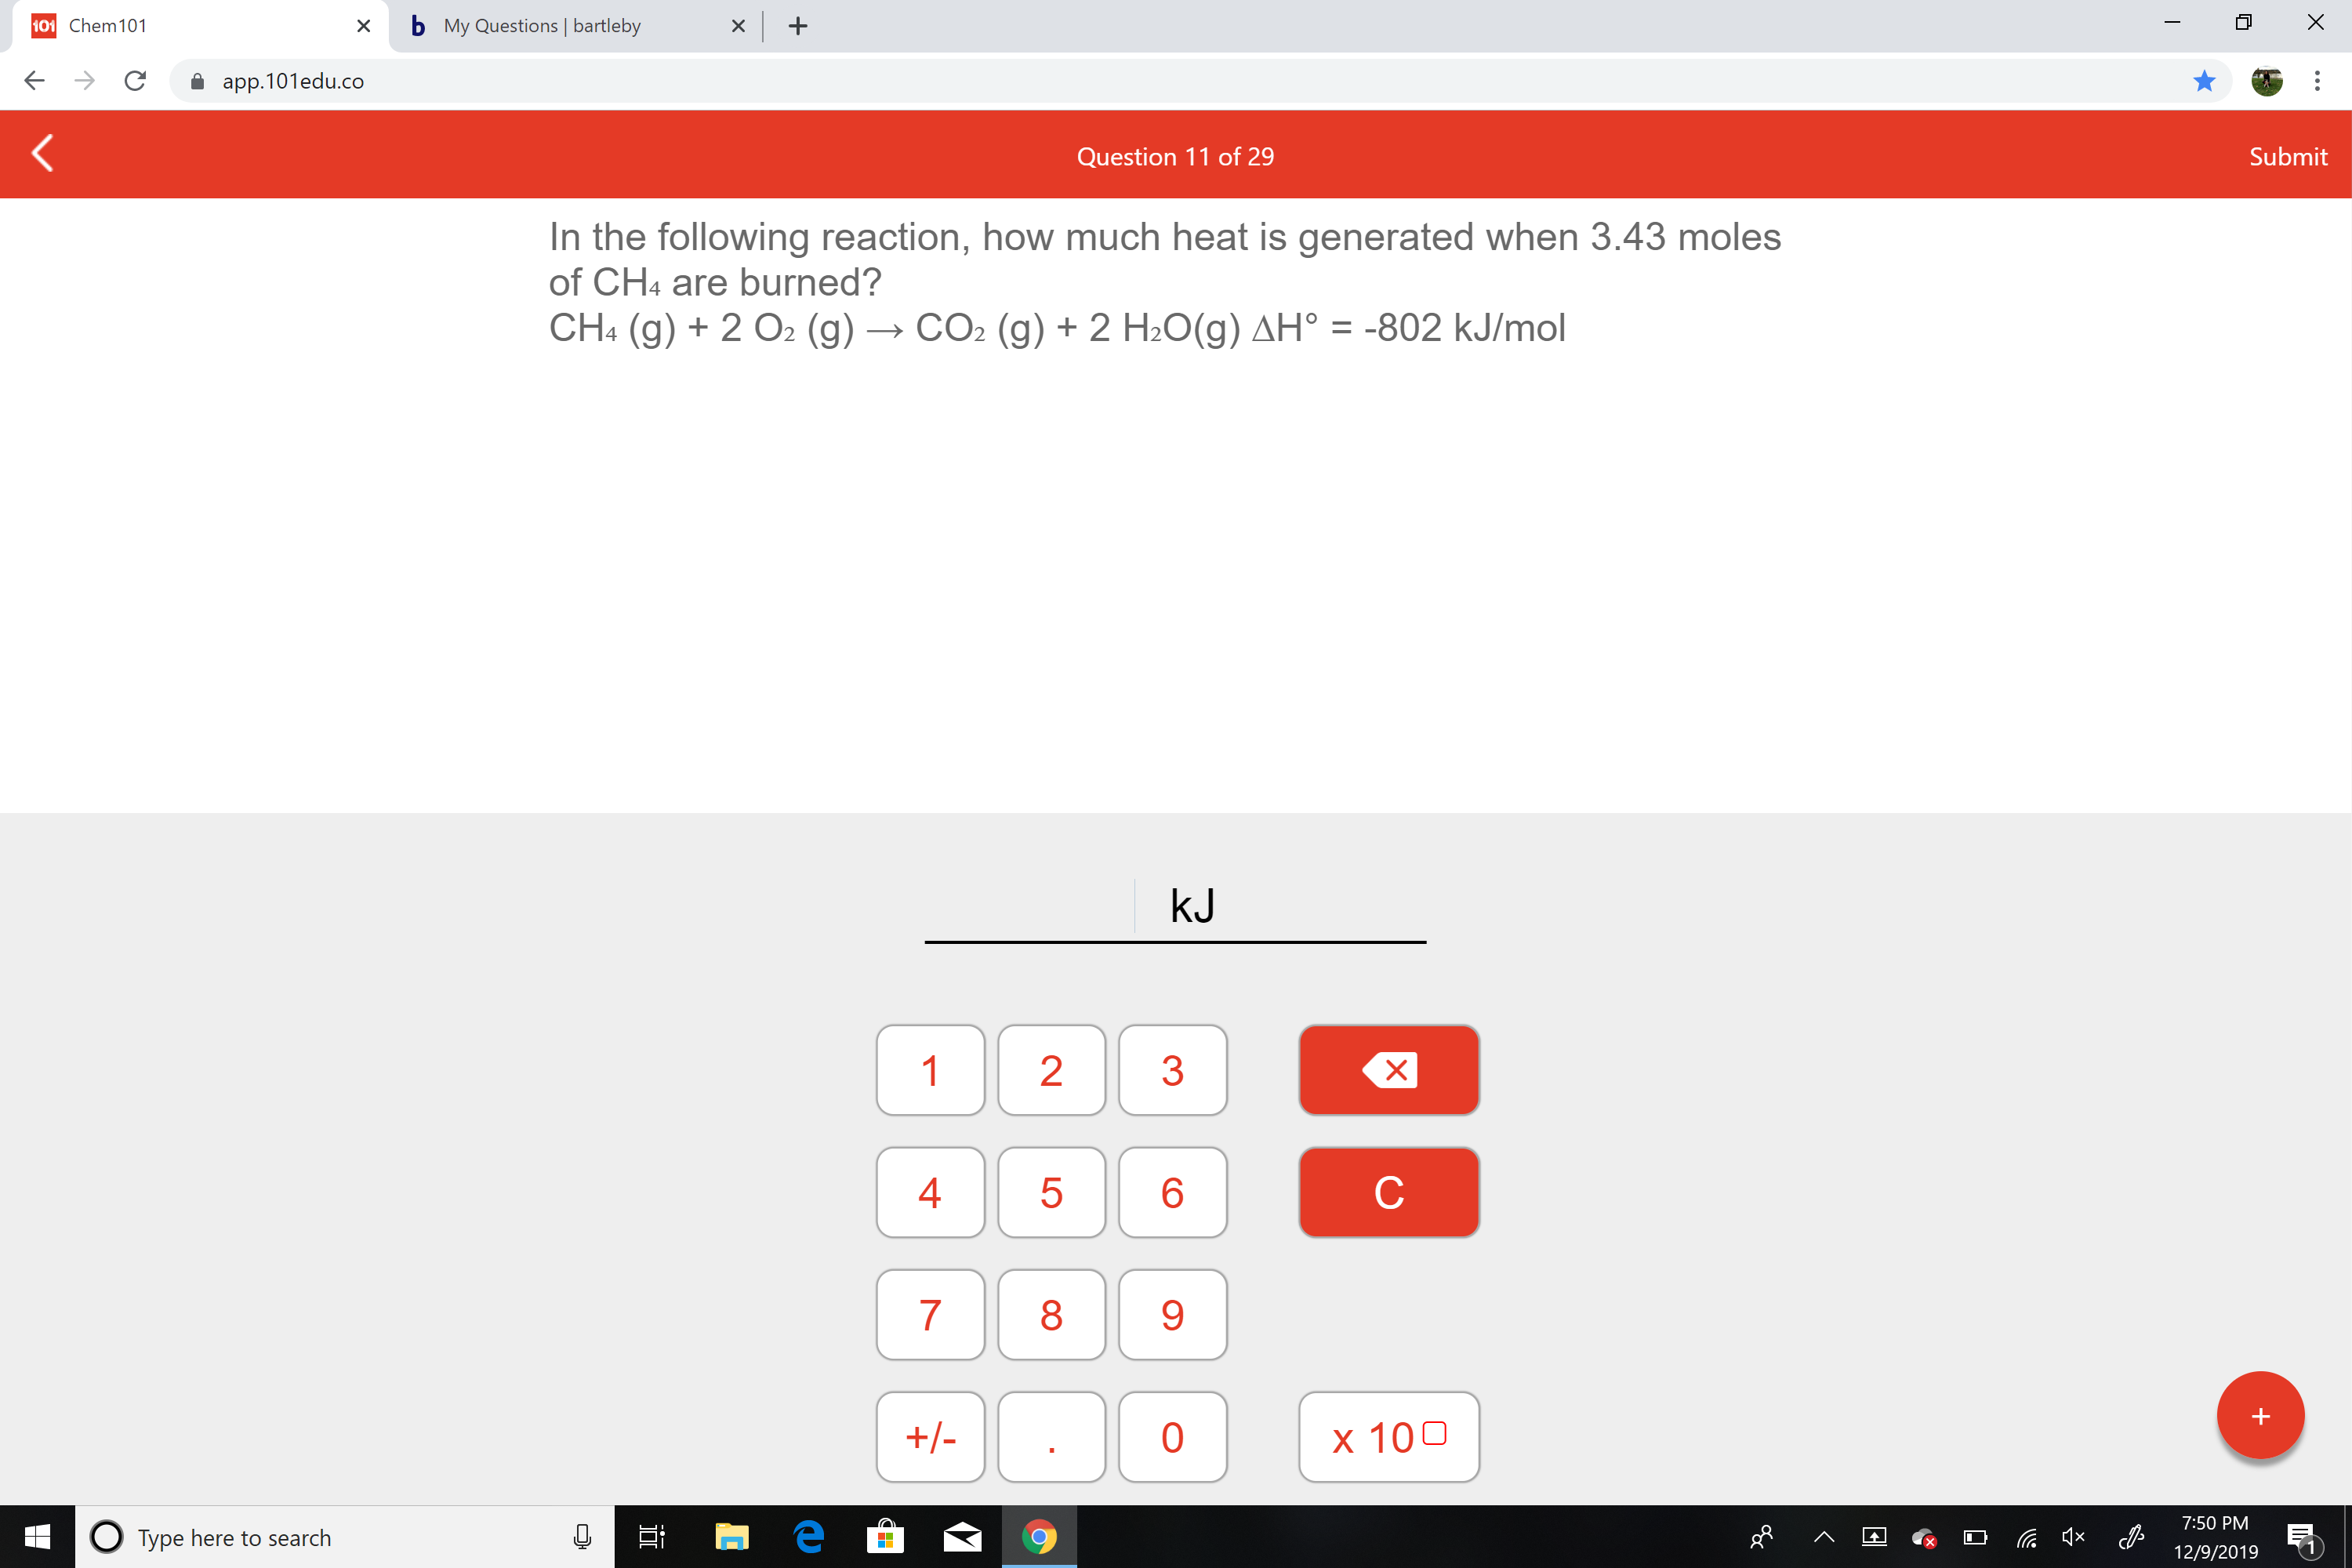 b My Questions | bartleby
101 Chem101
app.101edu.co
Submit
Question 11 of 29
In the following reaction, how much heat is generated when 3.43 moles
of CH4 are burned?
CH4 (g) + 2 O2 (g) → CO2 (g) + 2 H2O(g) AH° = -802 kJ/mol
%3D
kJ
1
4
8
+/-
x 100
7:50 PM
O Type here to search
12/9/2019
LO
